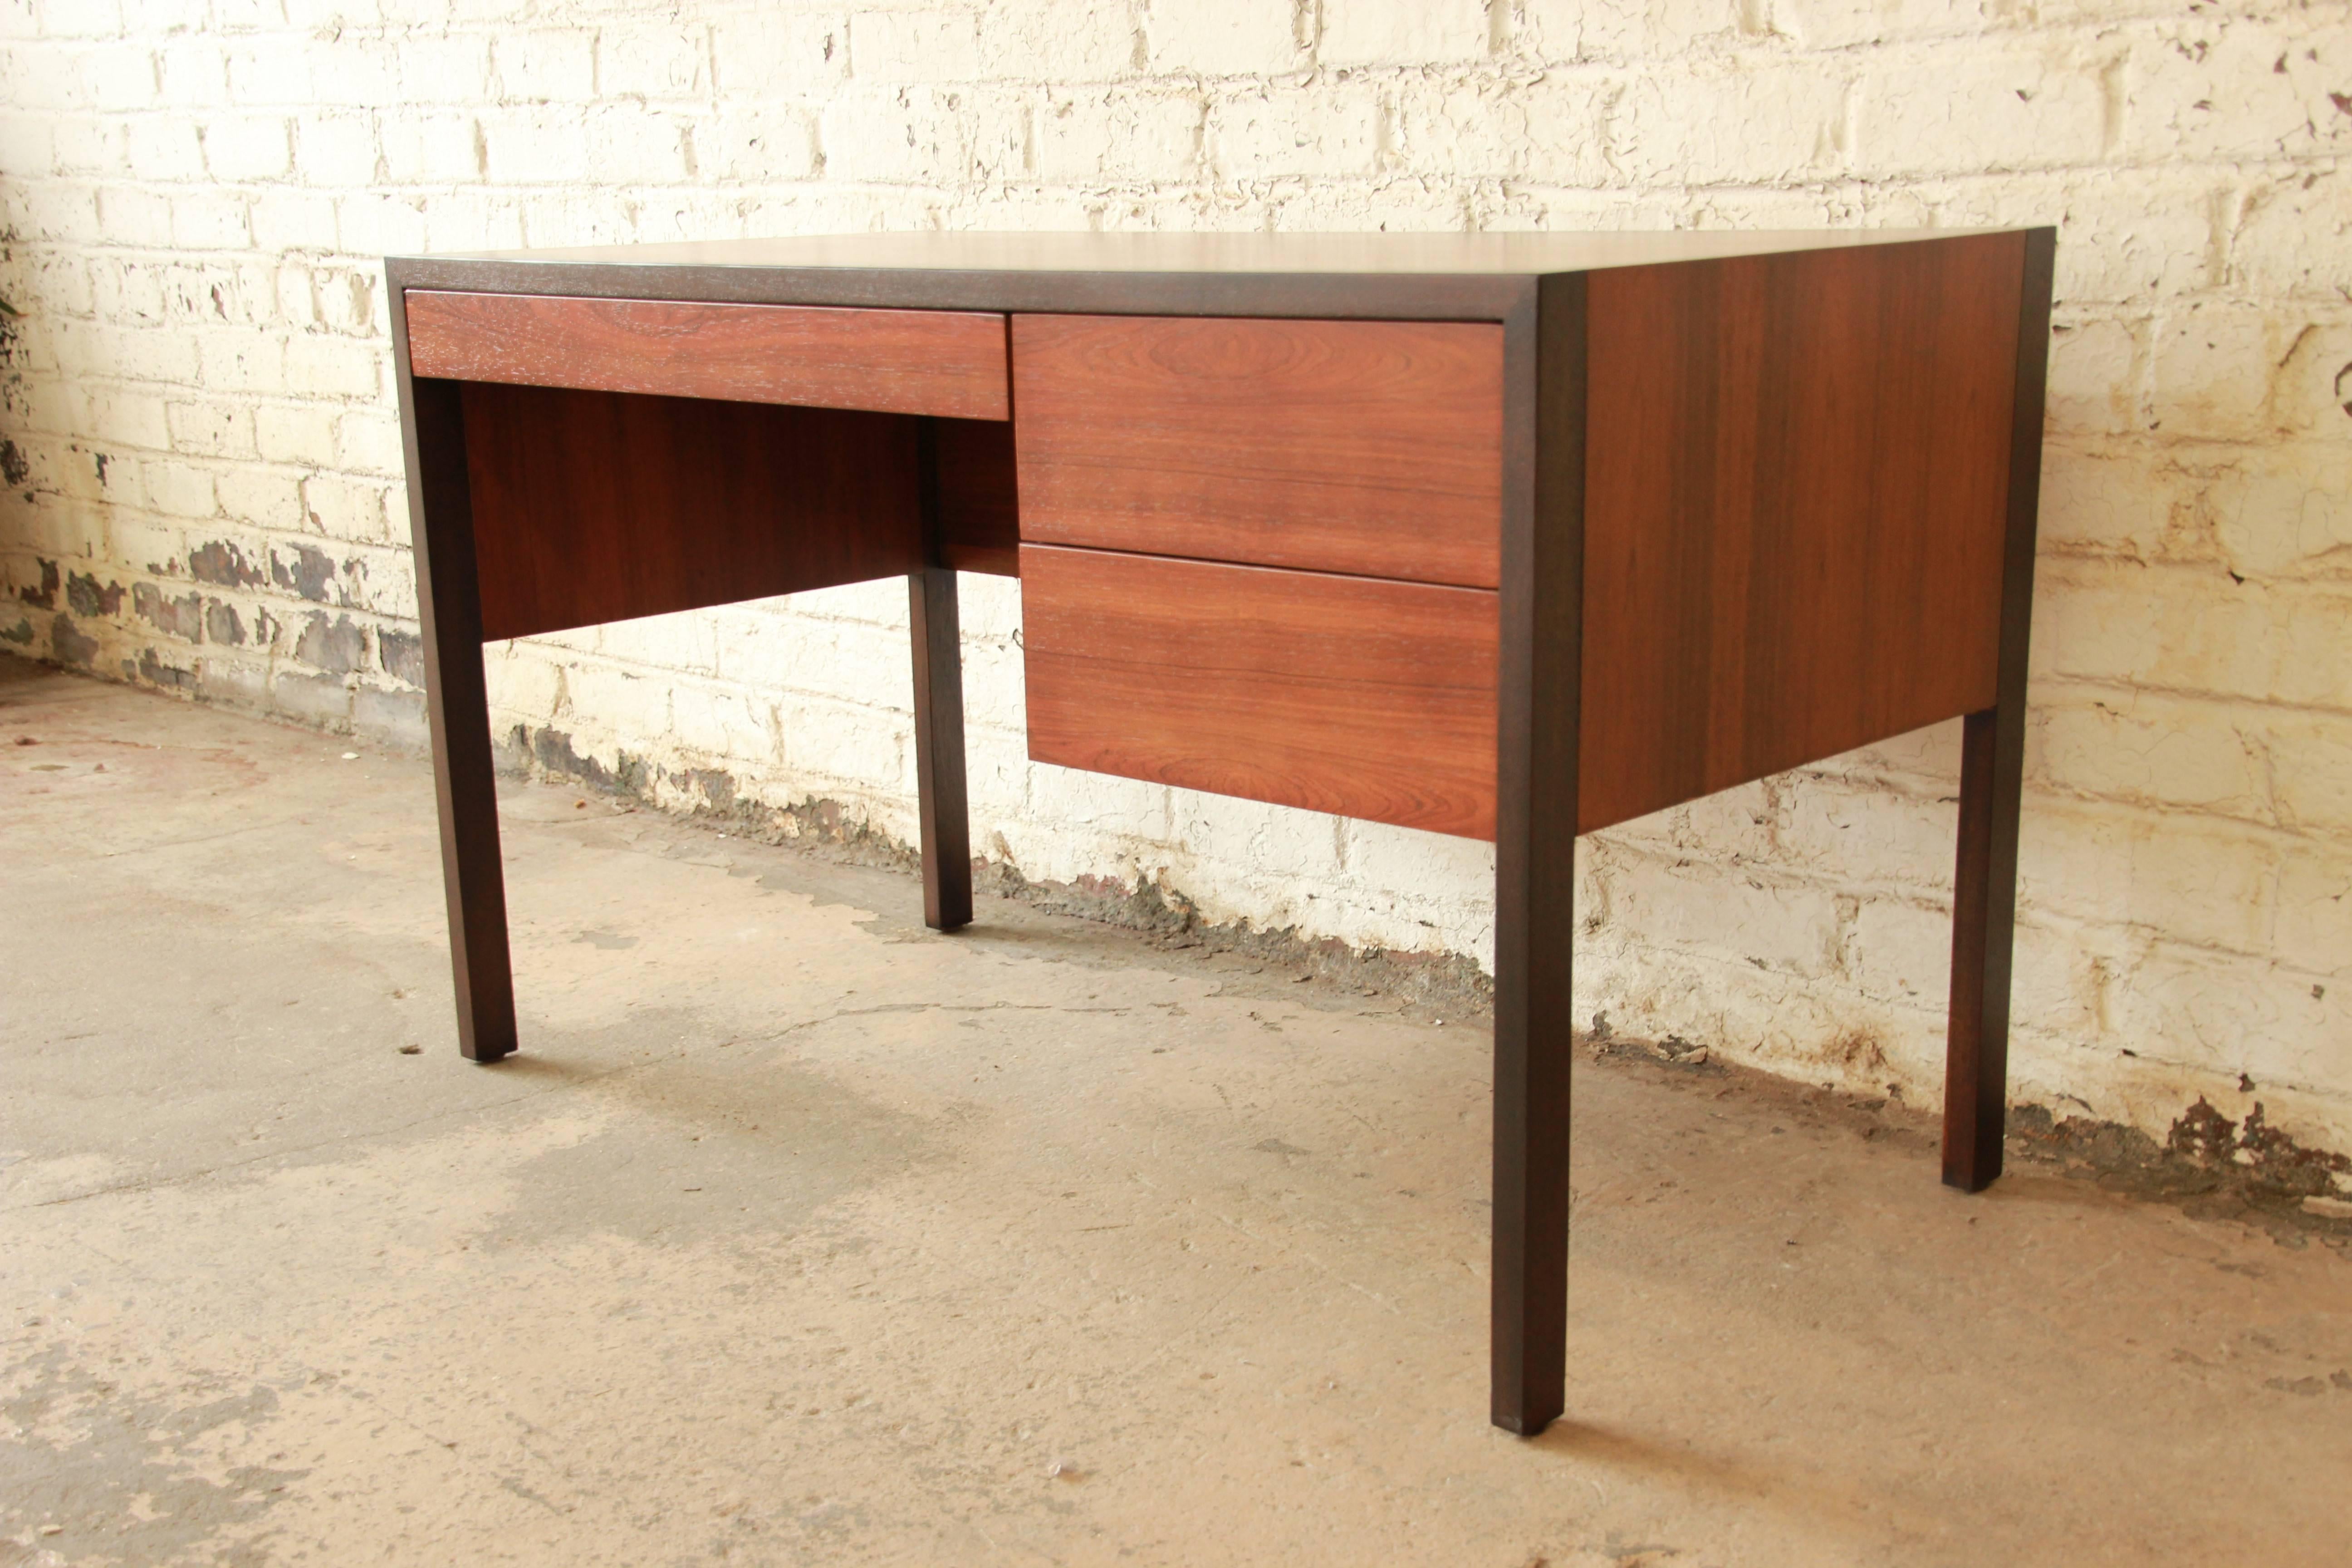 An exceptional Mid-Century Modern desk by iconic designer Harvey Probber. The desk features beautiful rosewood grain, with dark lacquered trim and legs. It has clean and sleek Mid-Century Modern lines--an excellent example of Probber's design work.